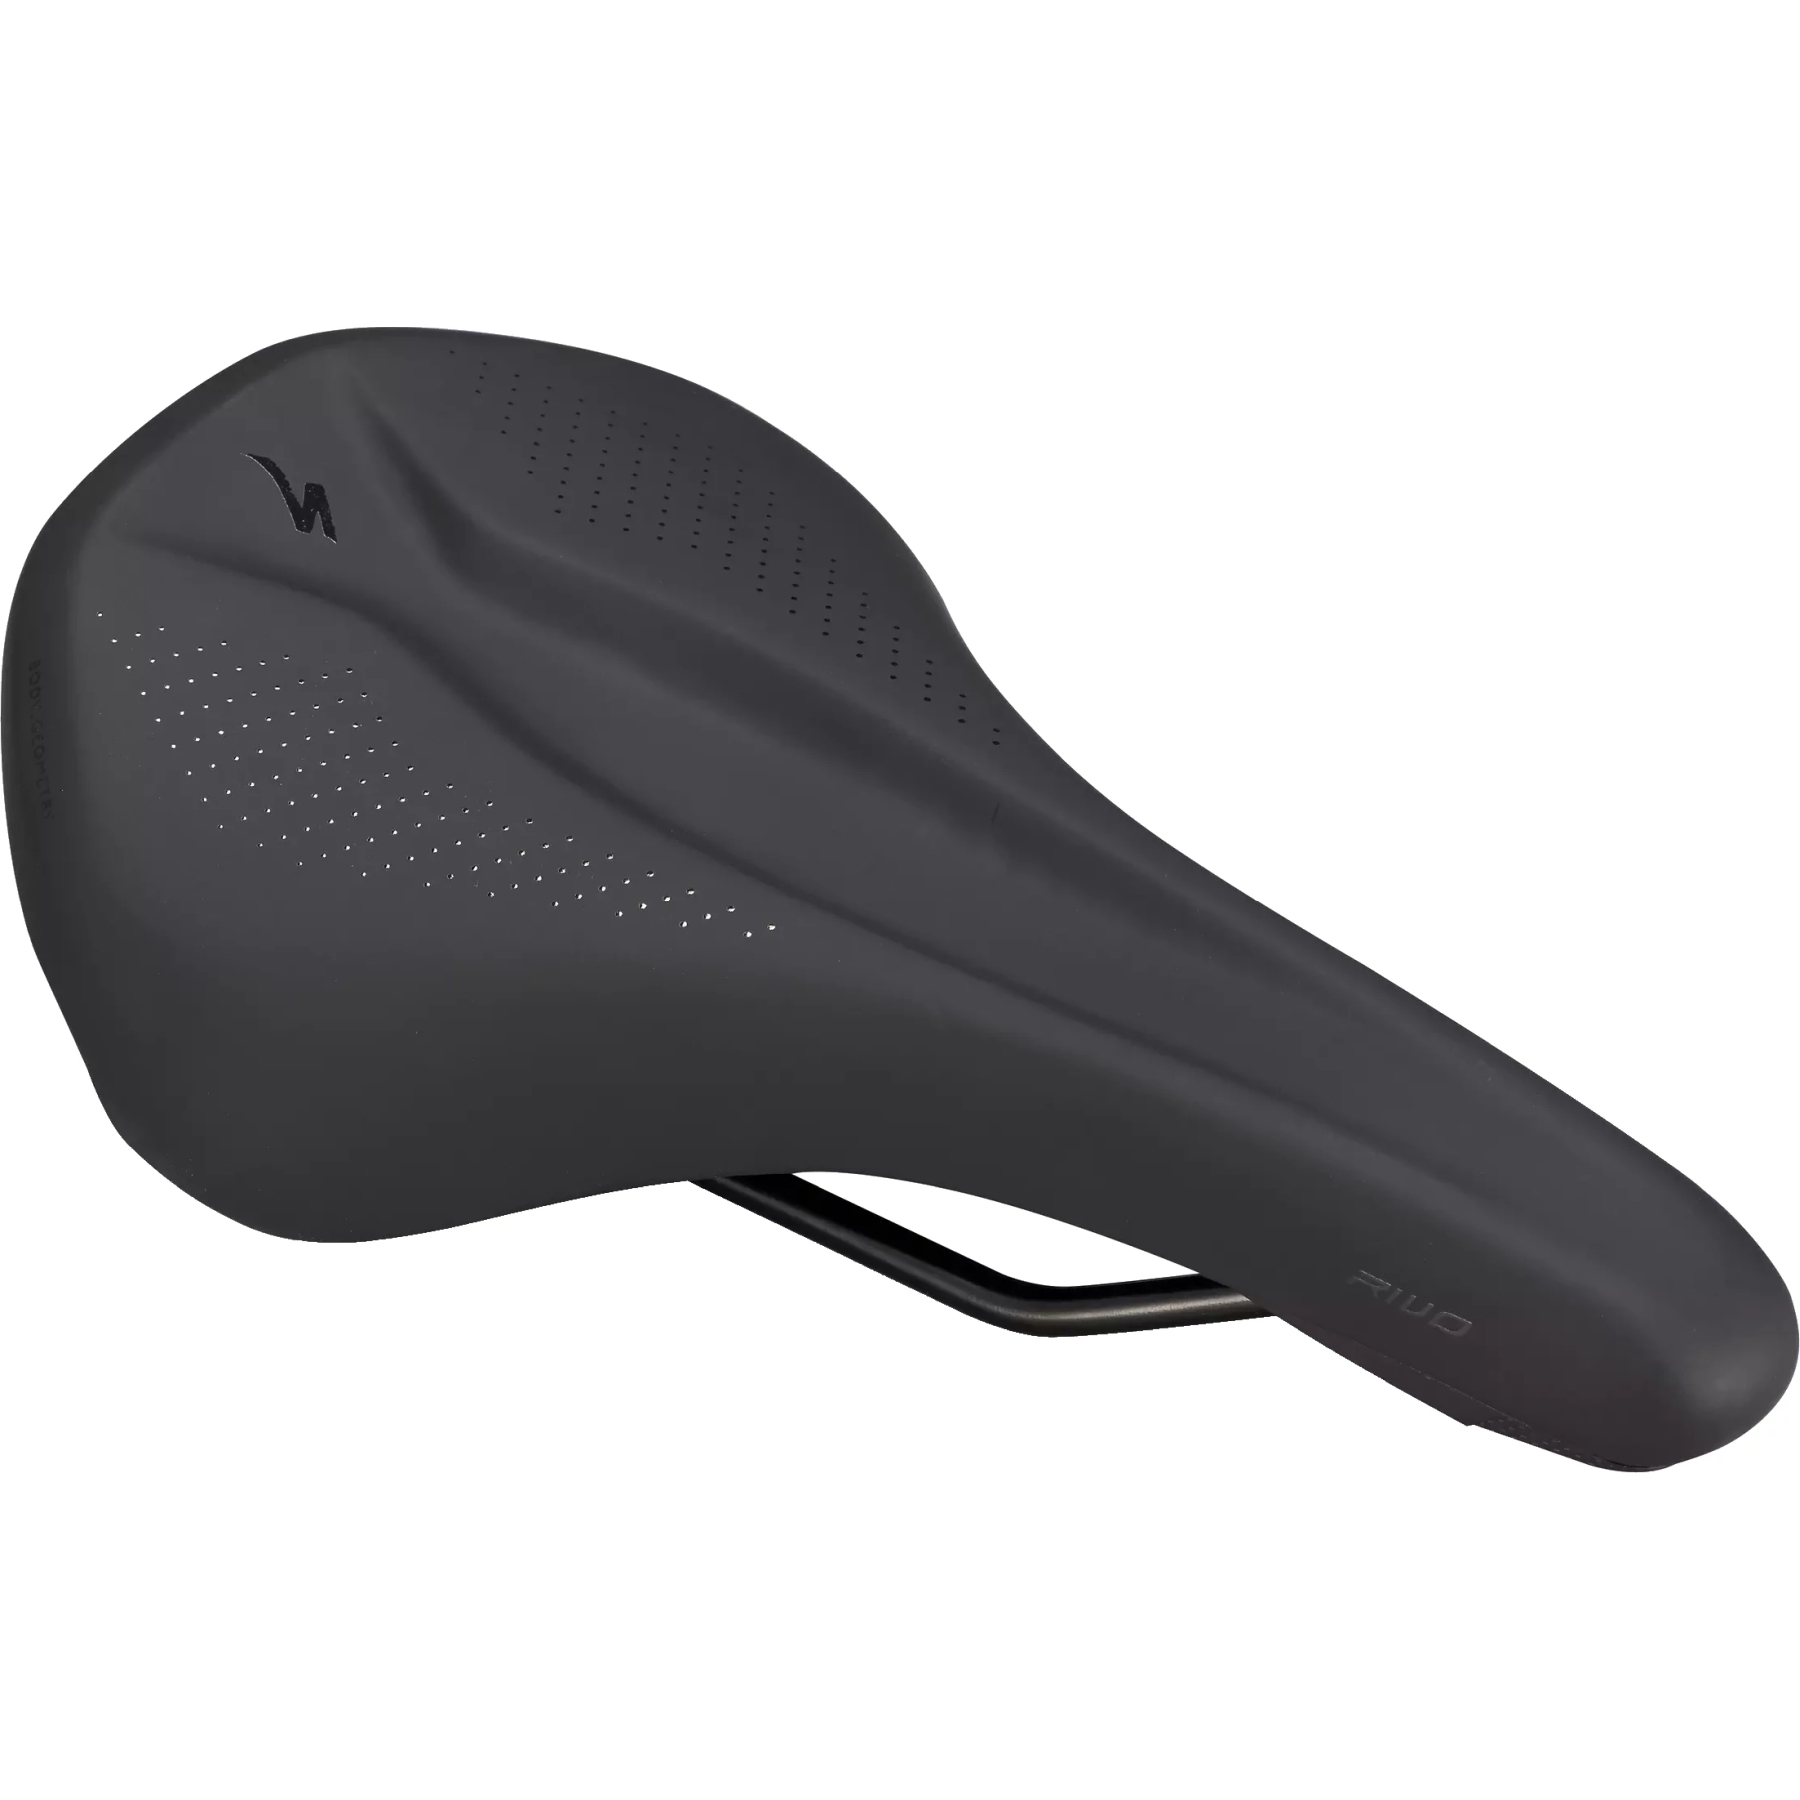 Picture of Specialized Rivo Sport Saddle - Black